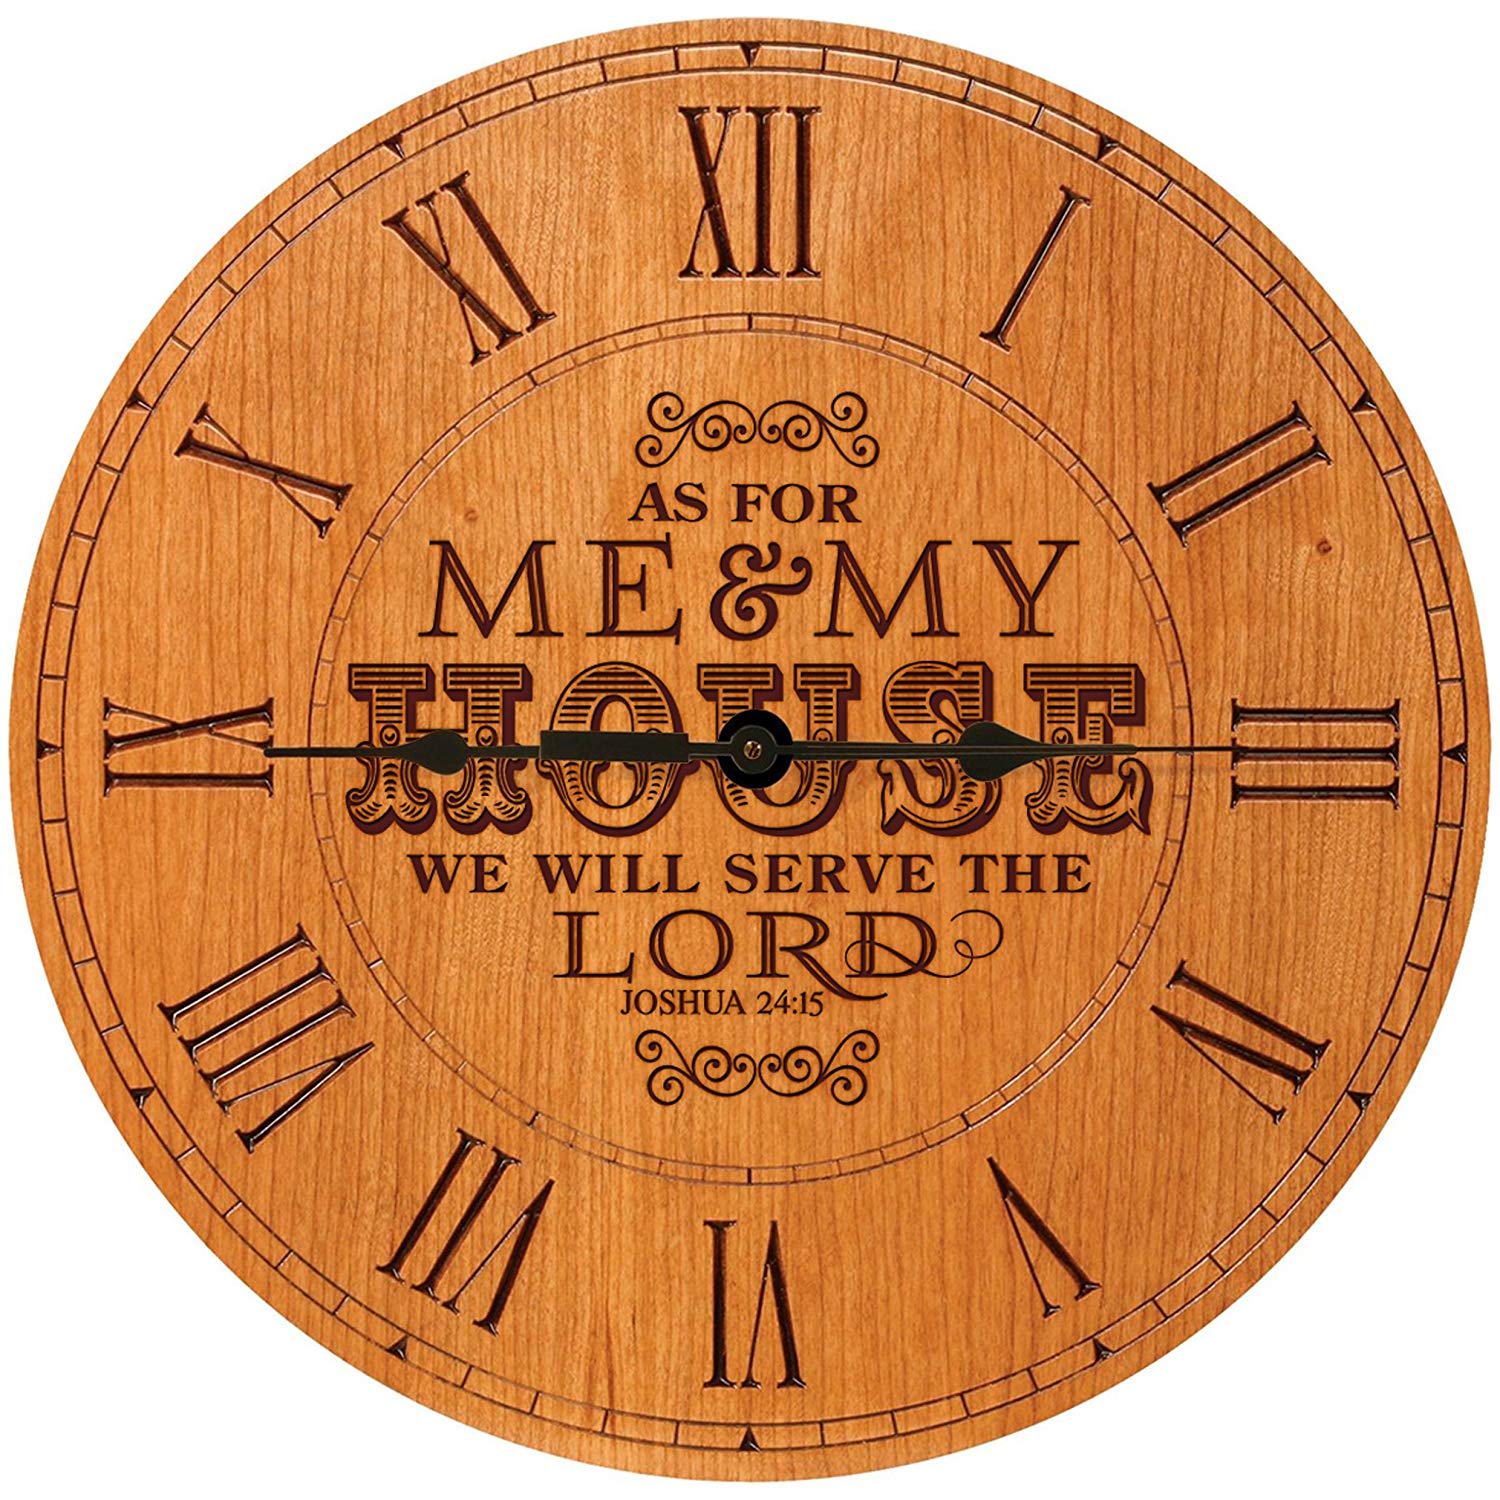 Lifesong Milestones Wooden Engraved Personalized Wedding Anniversary Wall Clock Gift for Couples